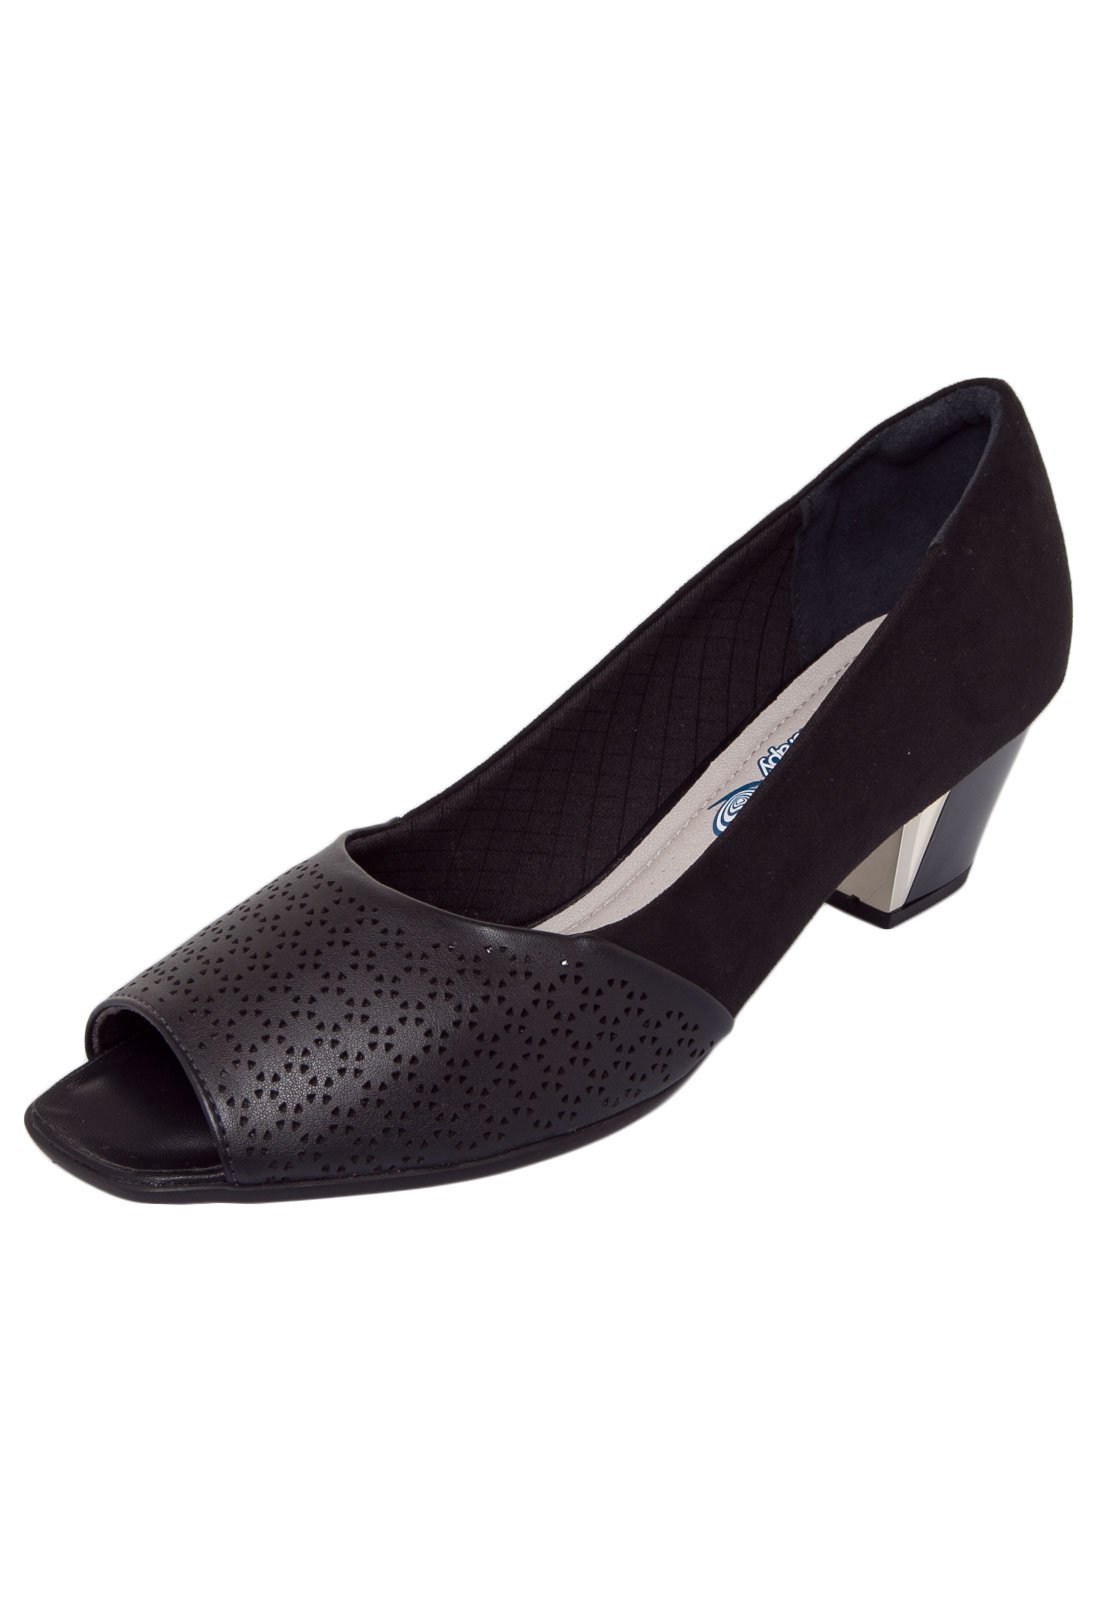 peep toe piccadilly maxi therapy